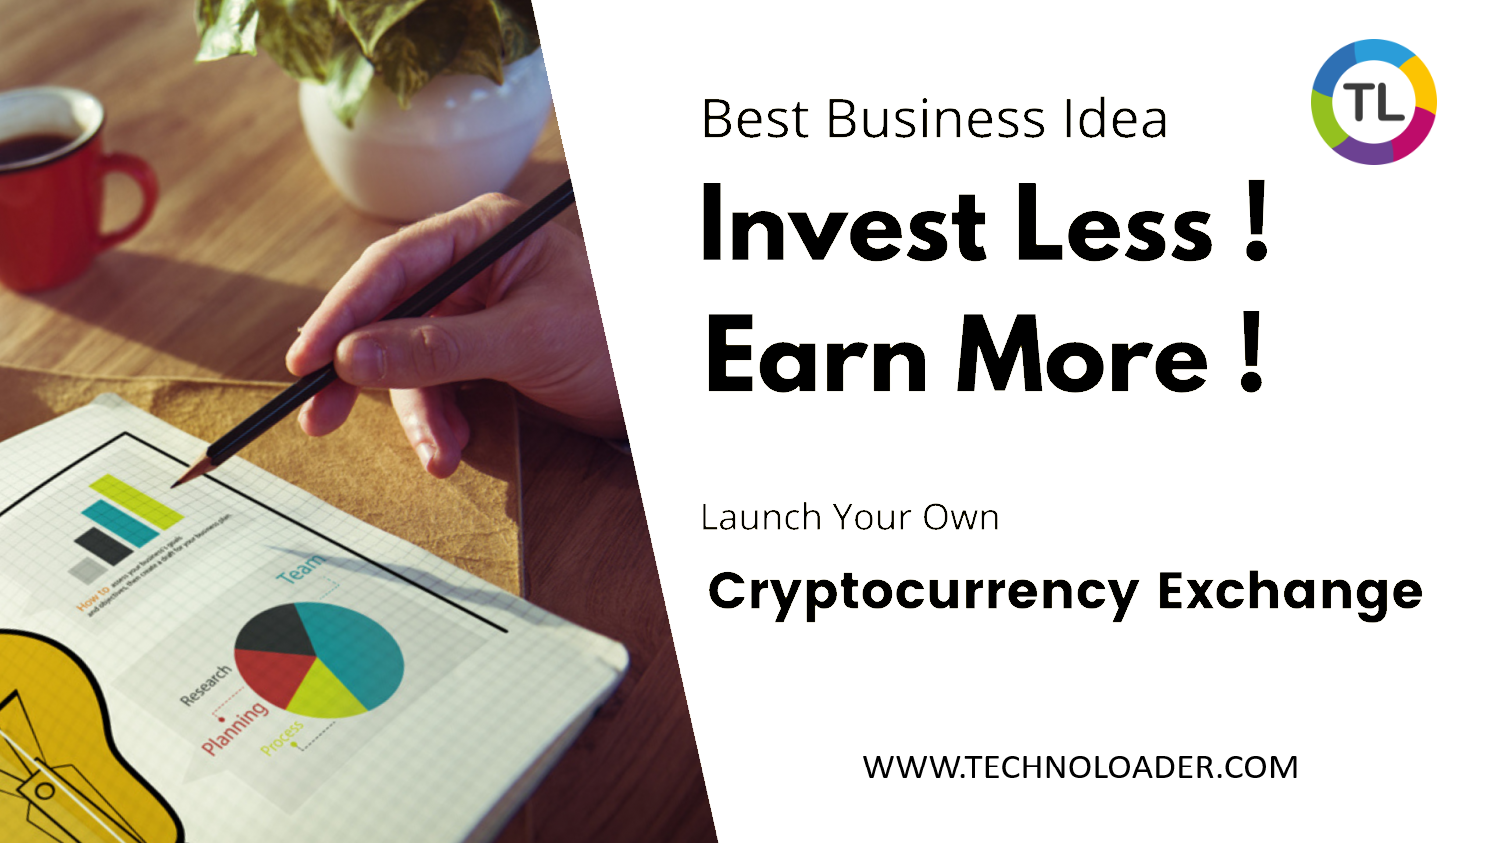 Best Business Idea ©

Invest Less !
Earn More!

Launch Your Own

Cryptocurrency Exchange

WWW.TECHNOLOADER.COM